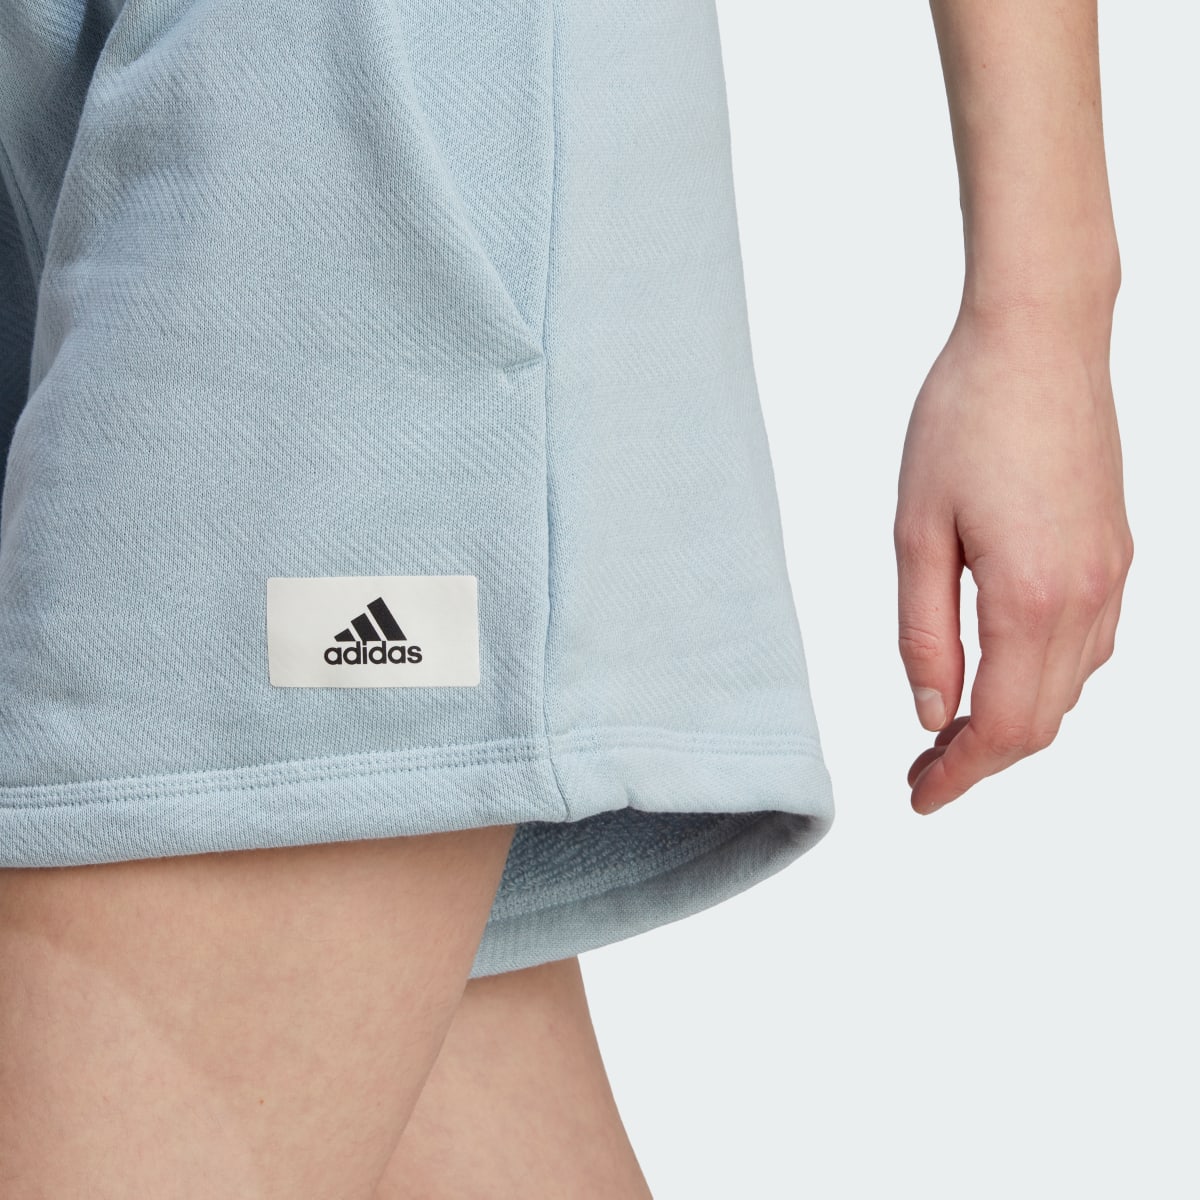 Adidas Lounge French Terry Shorts. 5